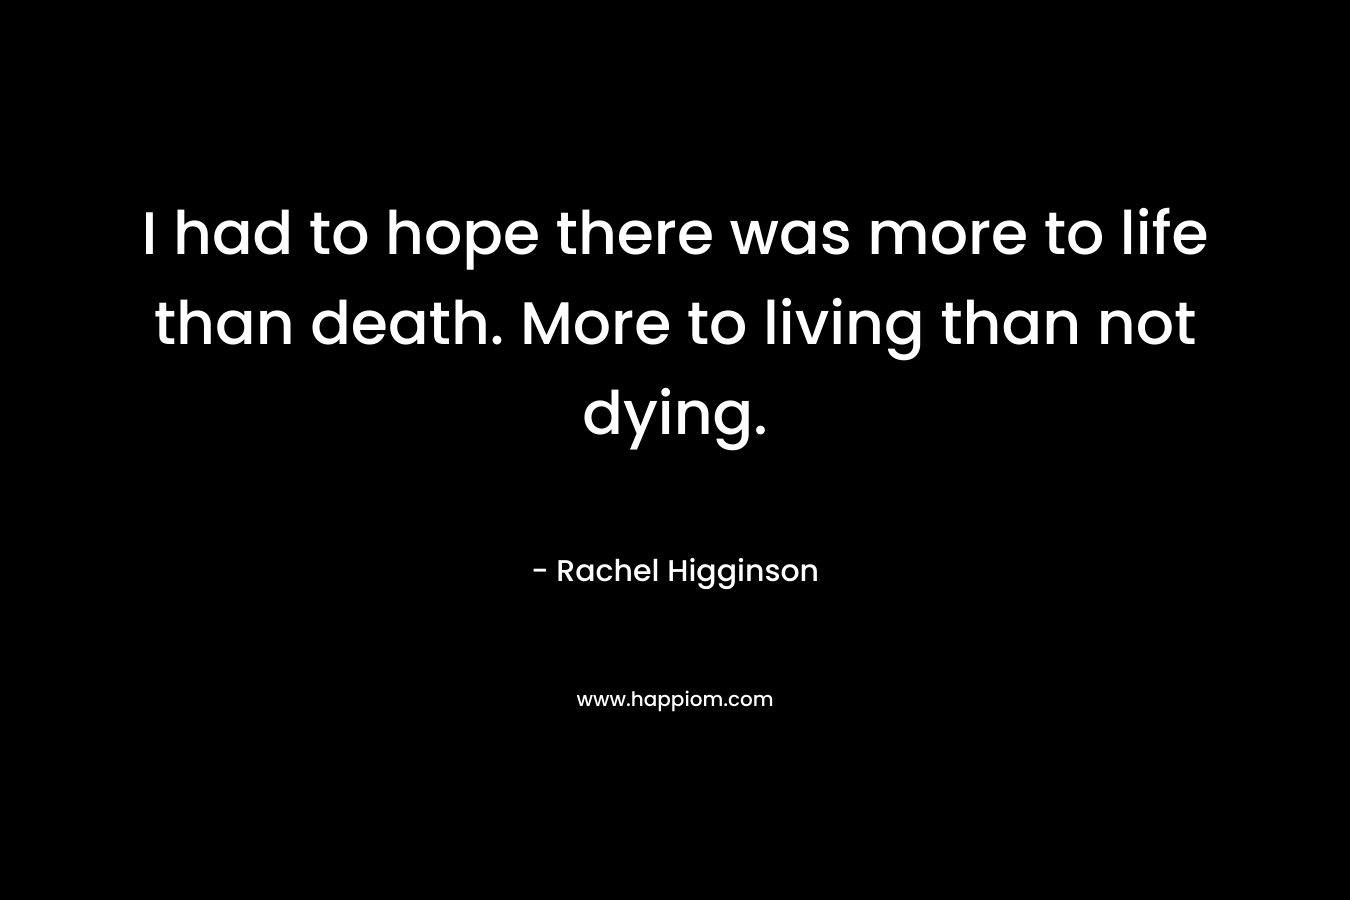 I had to hope there was more to life than death. More to living than not dying.